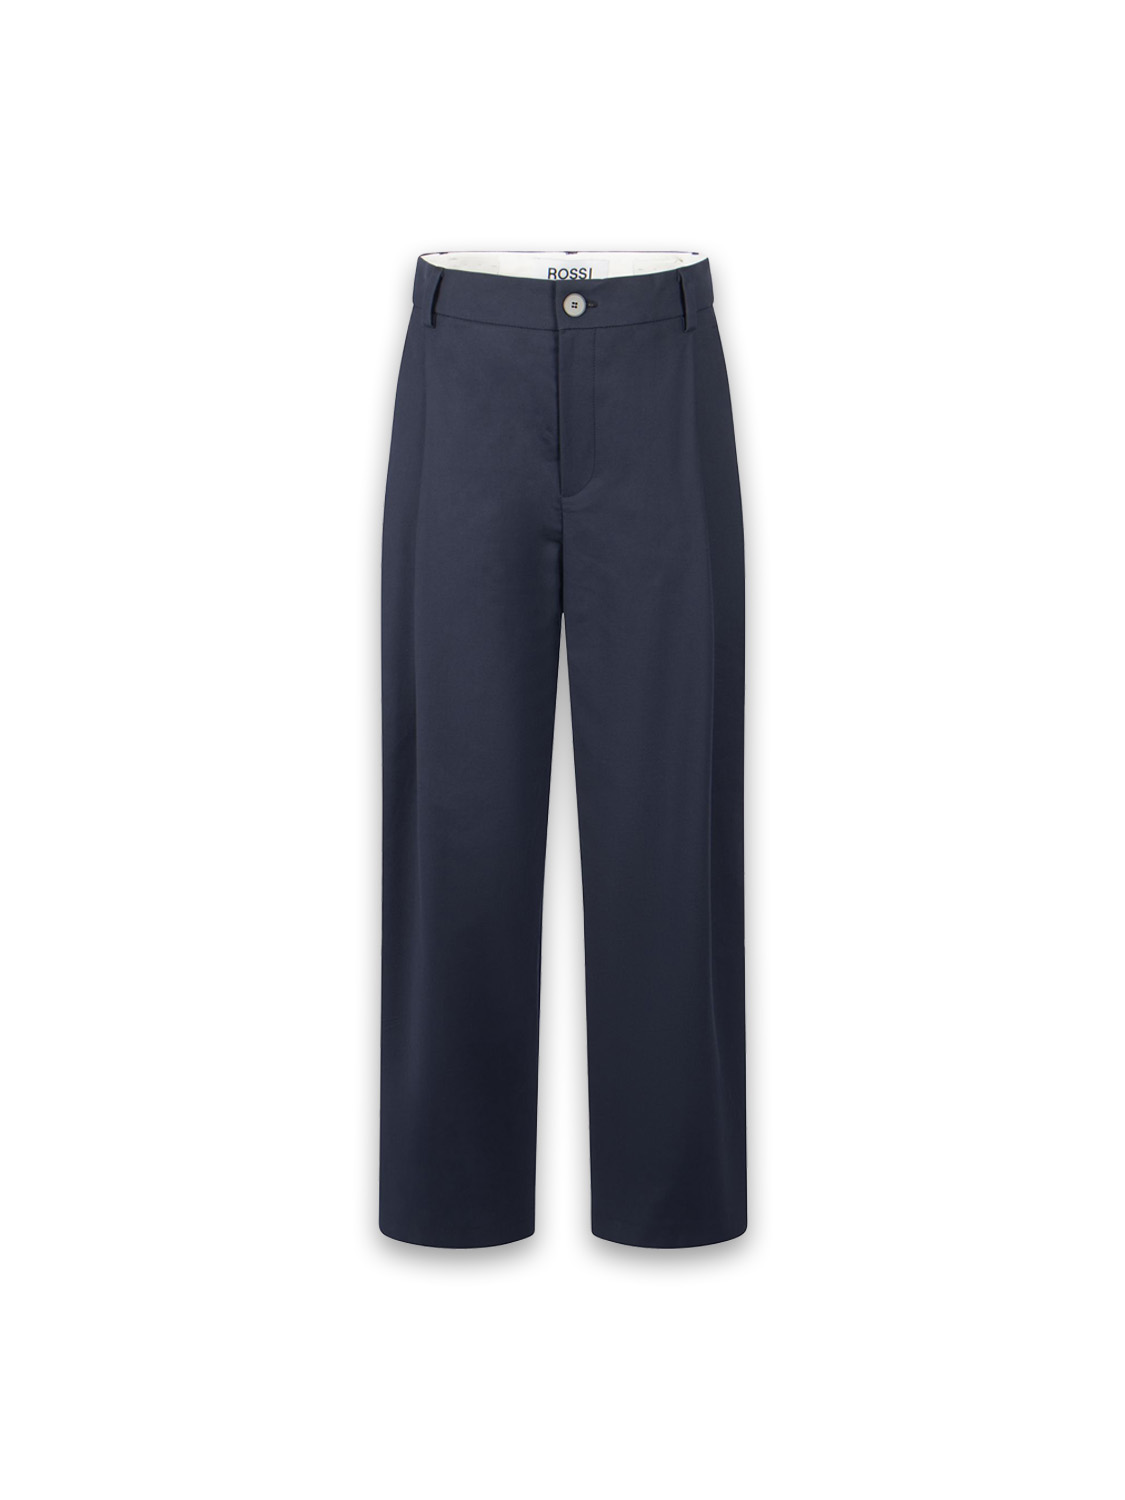 Robin – straight-leg trousers made of cotton satin 